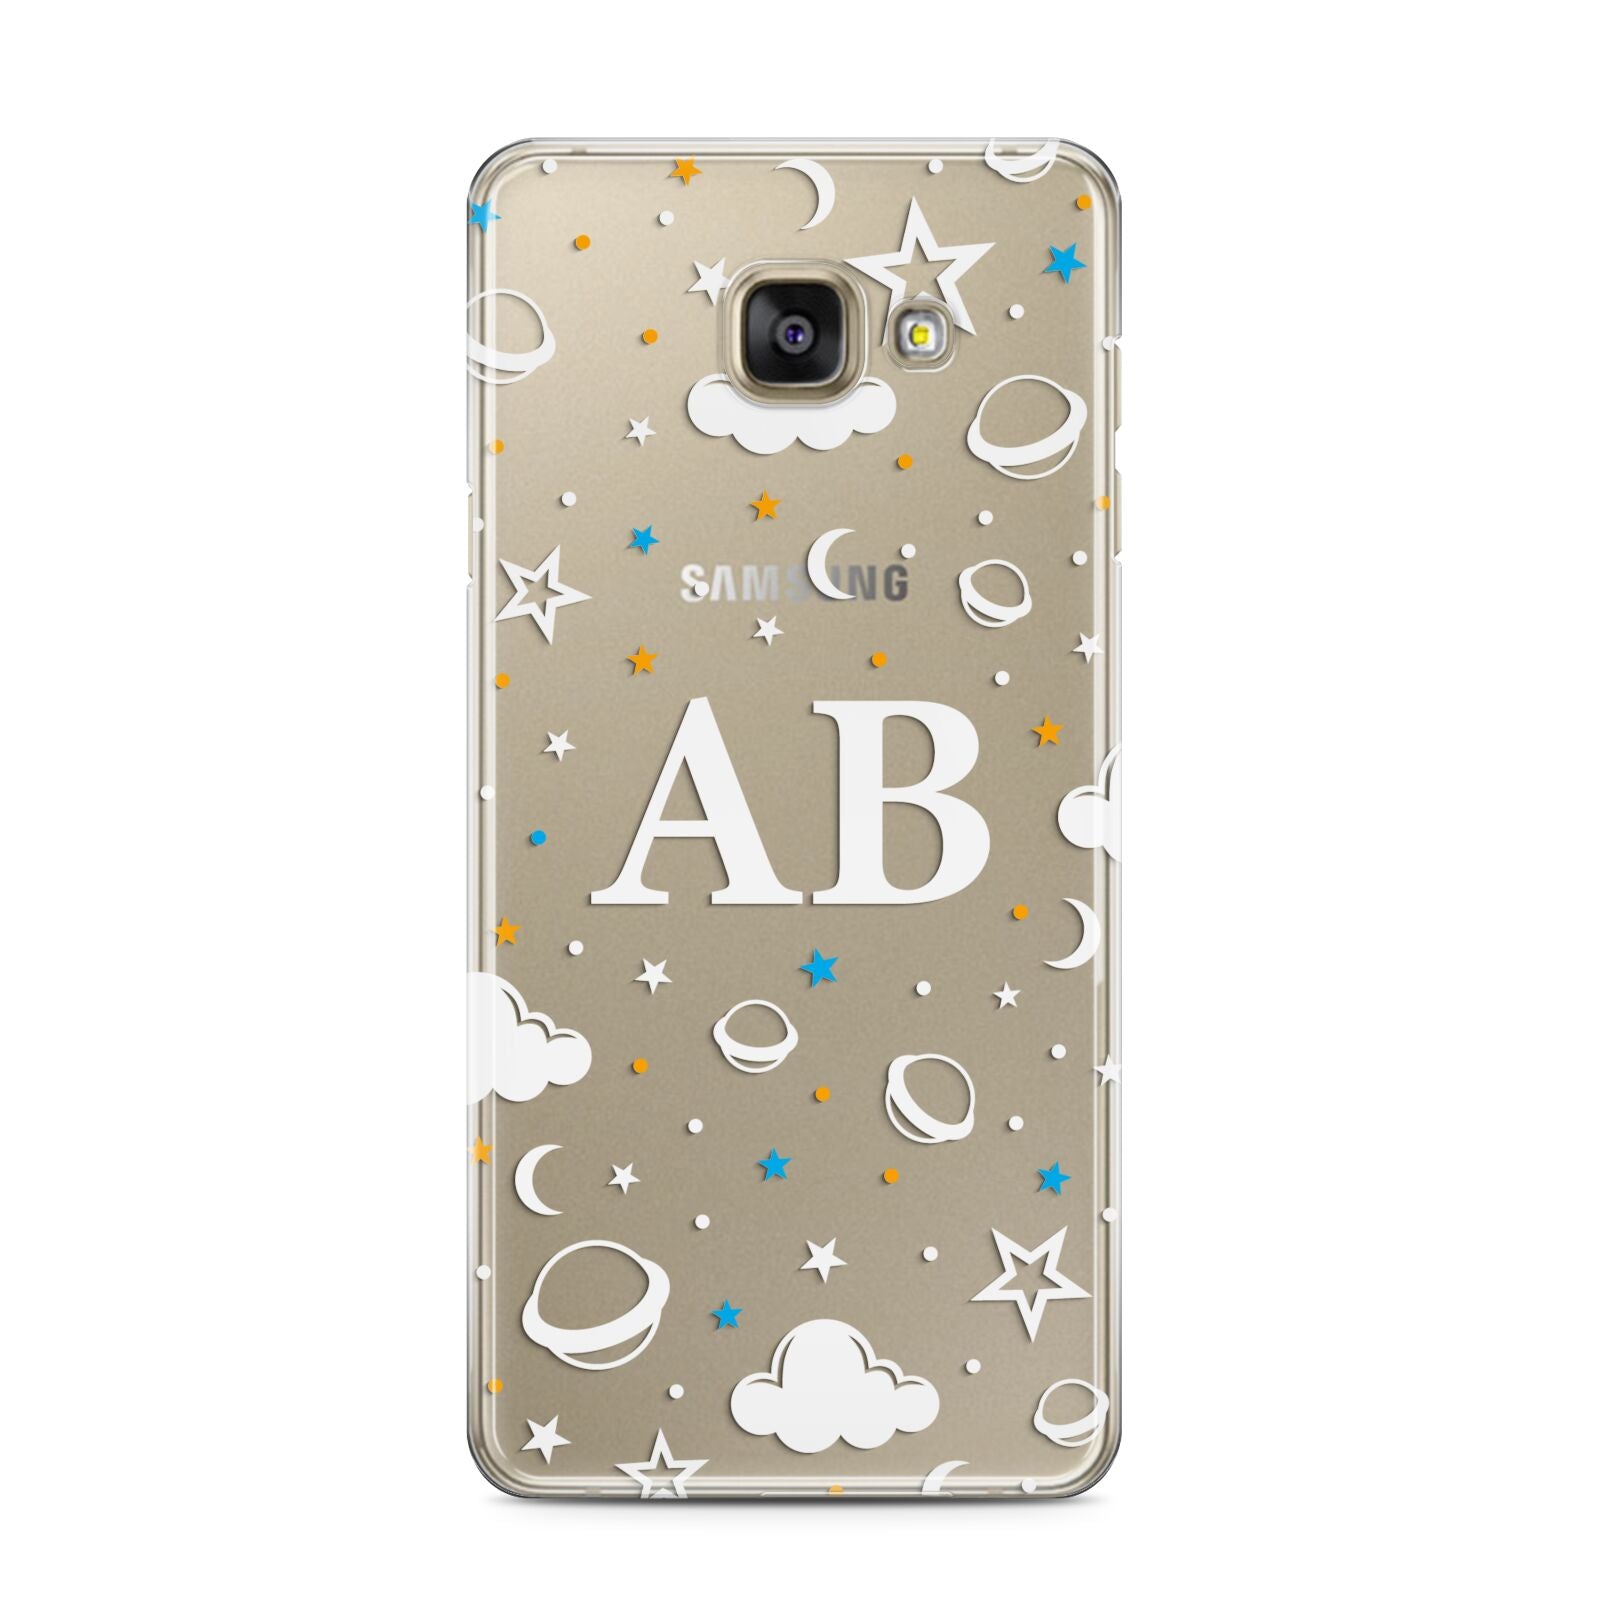 Astronomical Initials Samsung Galaxy A3 2016 Case on gold phone